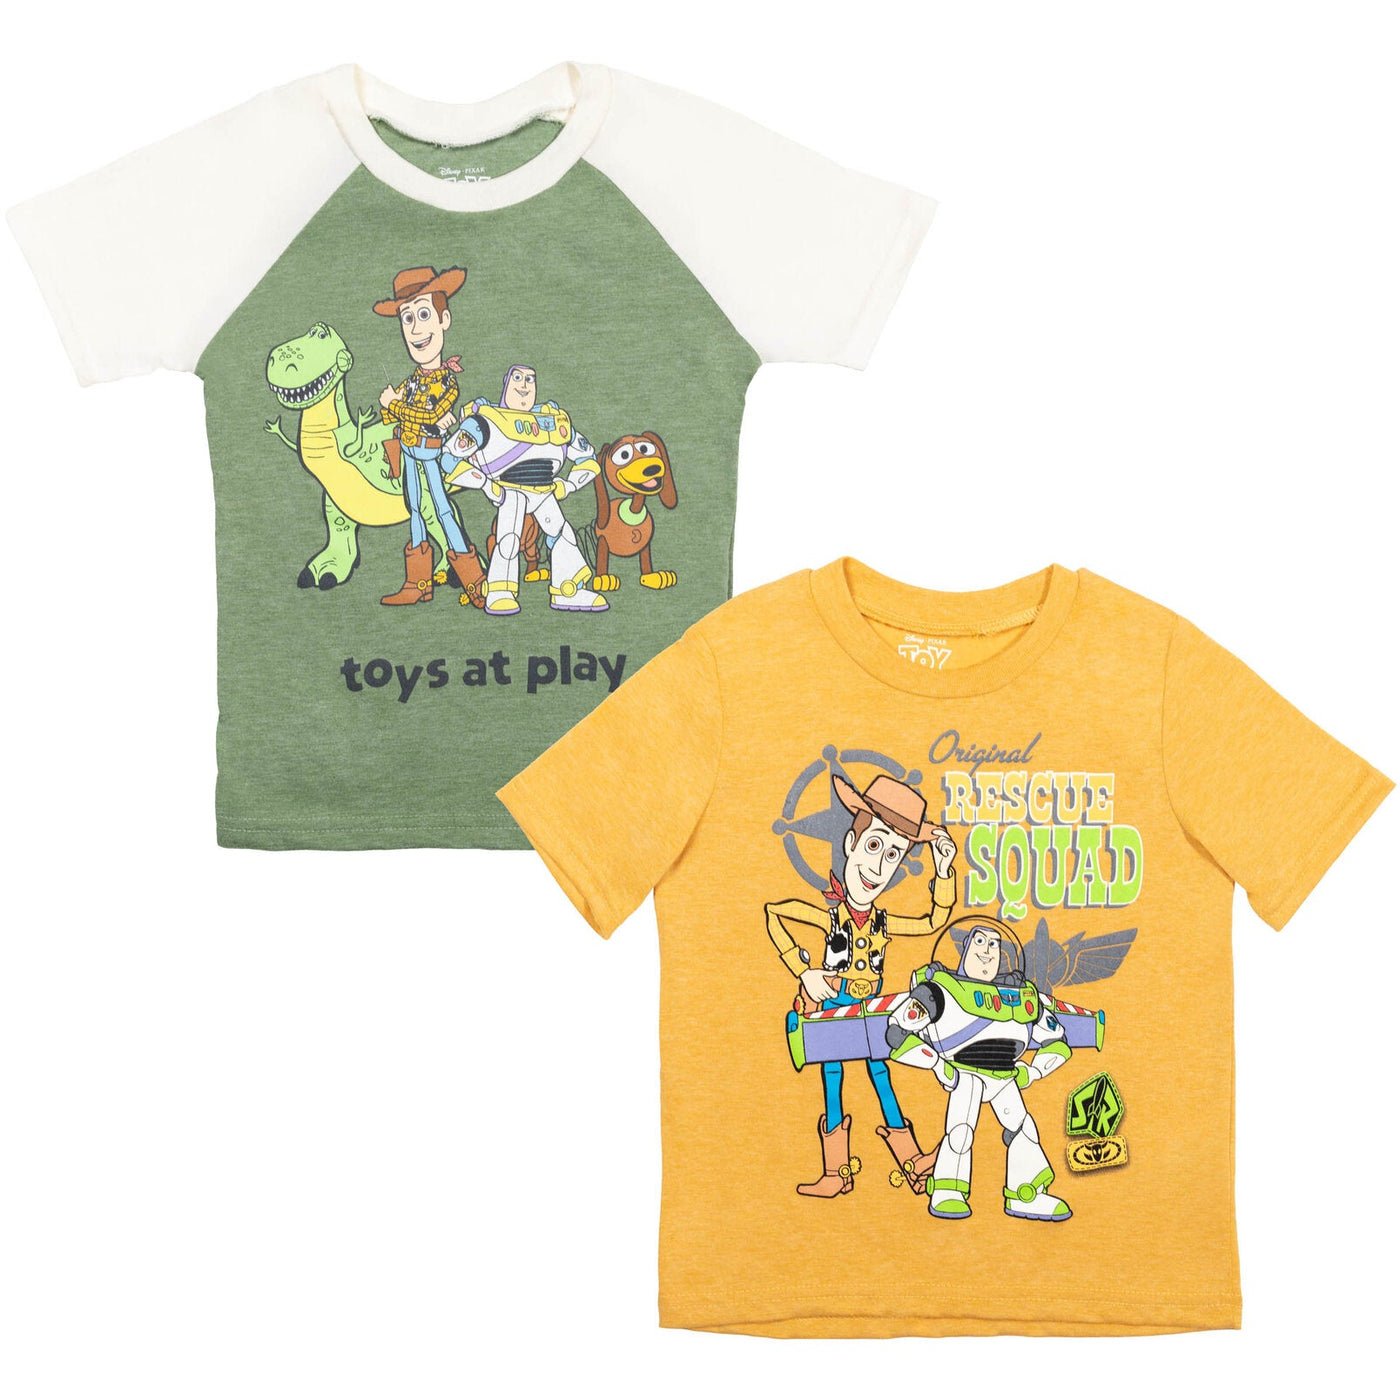 Disney Mickey Mouse Pixar Toy Story 2 Pack Cosplay T-Shirts - imagikids